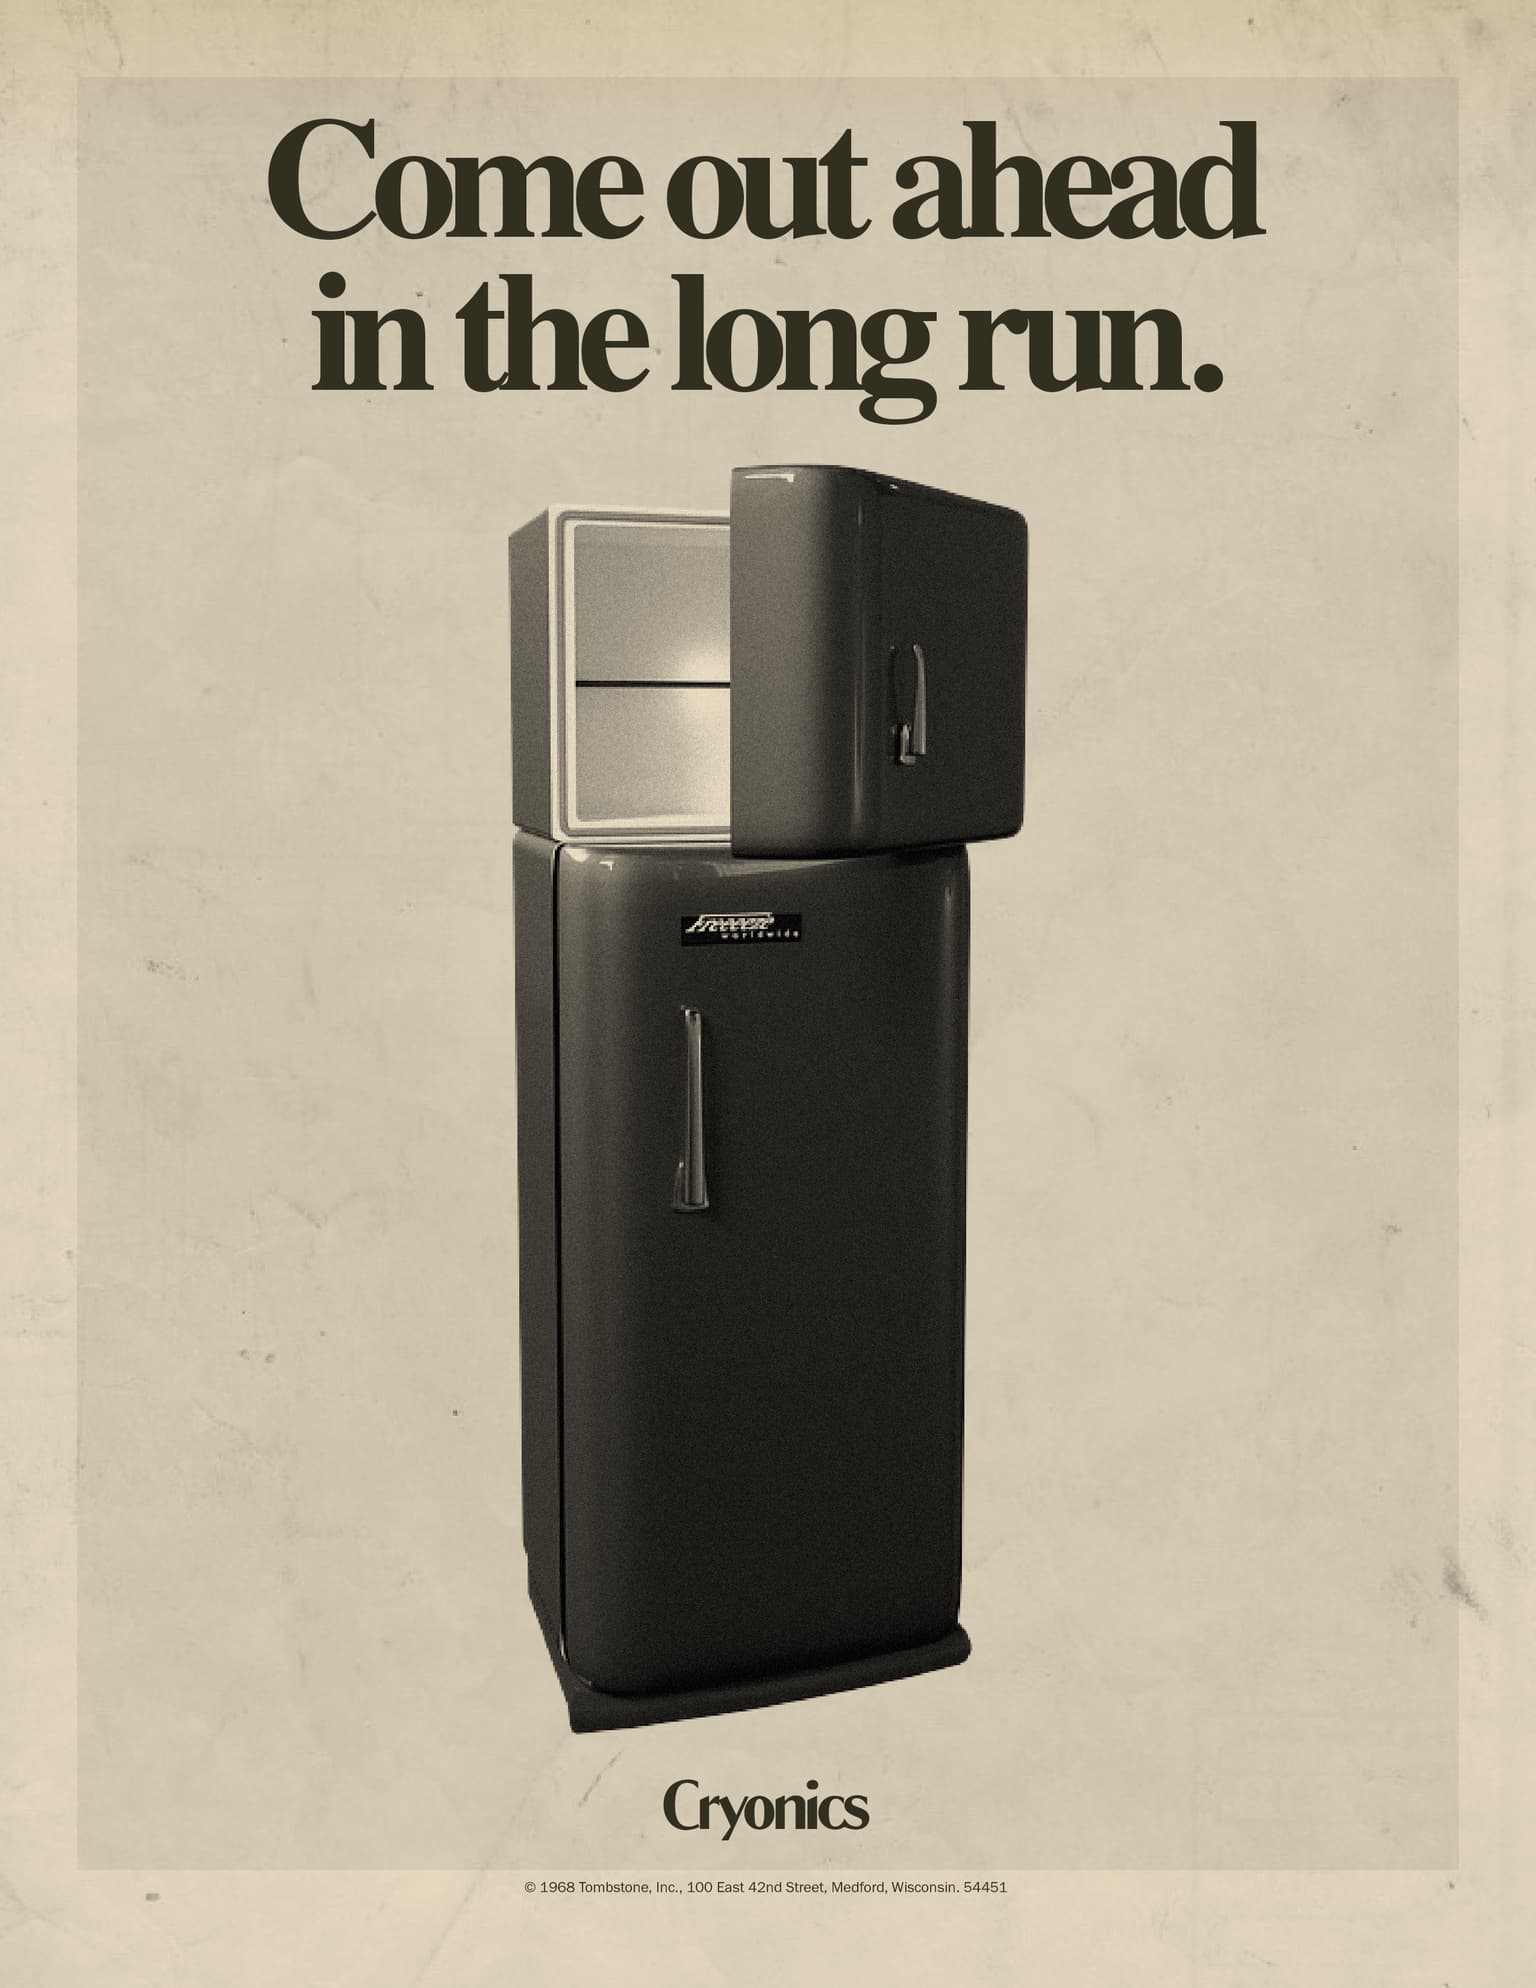 A faux-vintage magazine ad reads “Come out ahead in the long run”, followed by an image of a vintage refrigerator with its top freezer door slightly ajar